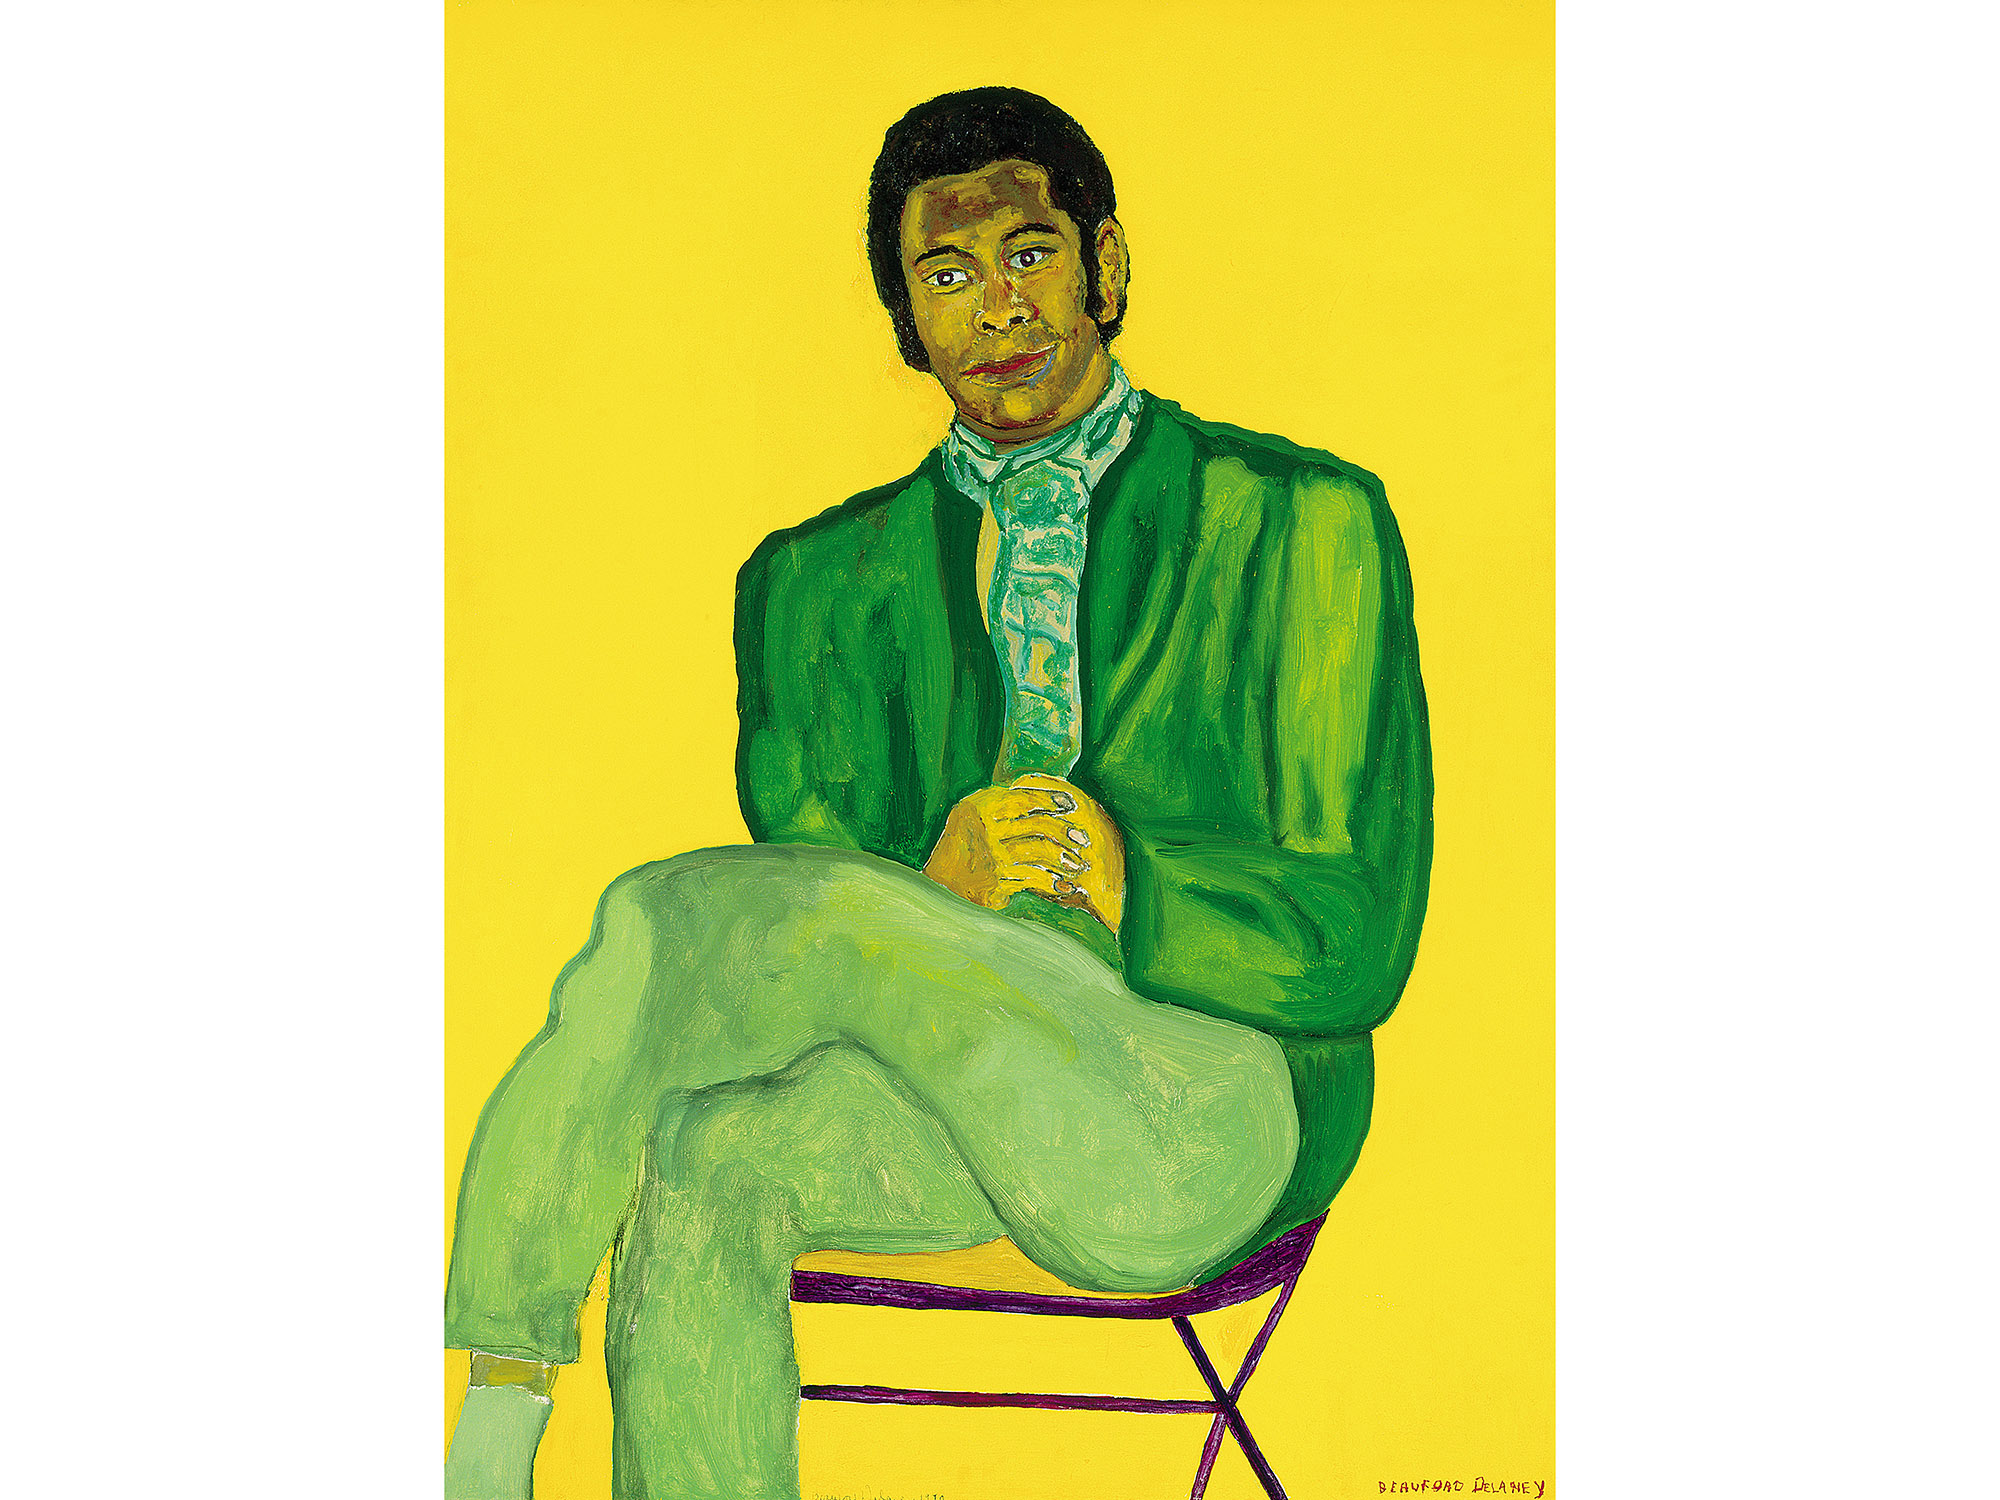 A painting of a man sitting on a brown folding chair against a flat yellow background. He is wearing a bright green suit with green socks and tie. His hands are folded on his lap and he is looking into the distance. His black hair is cut short and he has long sideburns. 